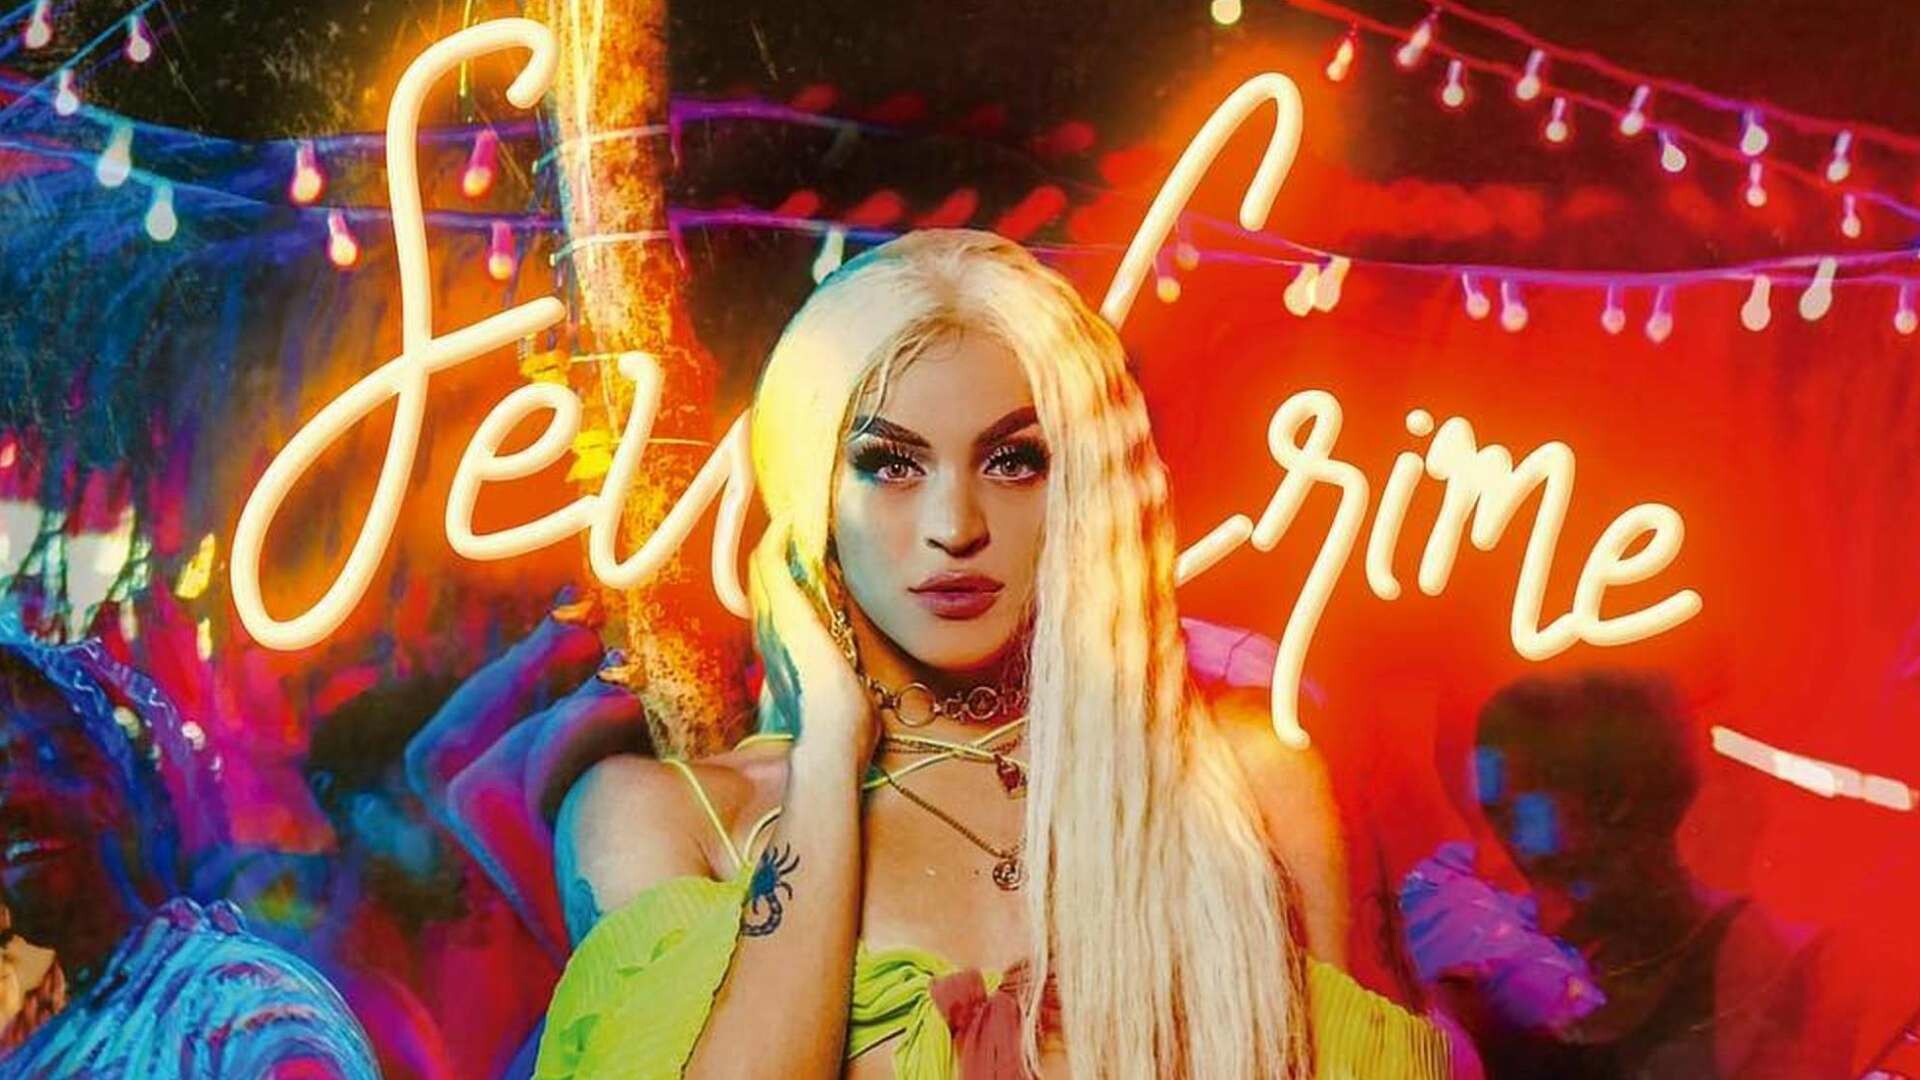 Pabllo Vittar: Appeared on TV for the first time in 2014, on a Brazilian talent singing show, performing "I Have Nothing". 1920x1080 Full HD Background.